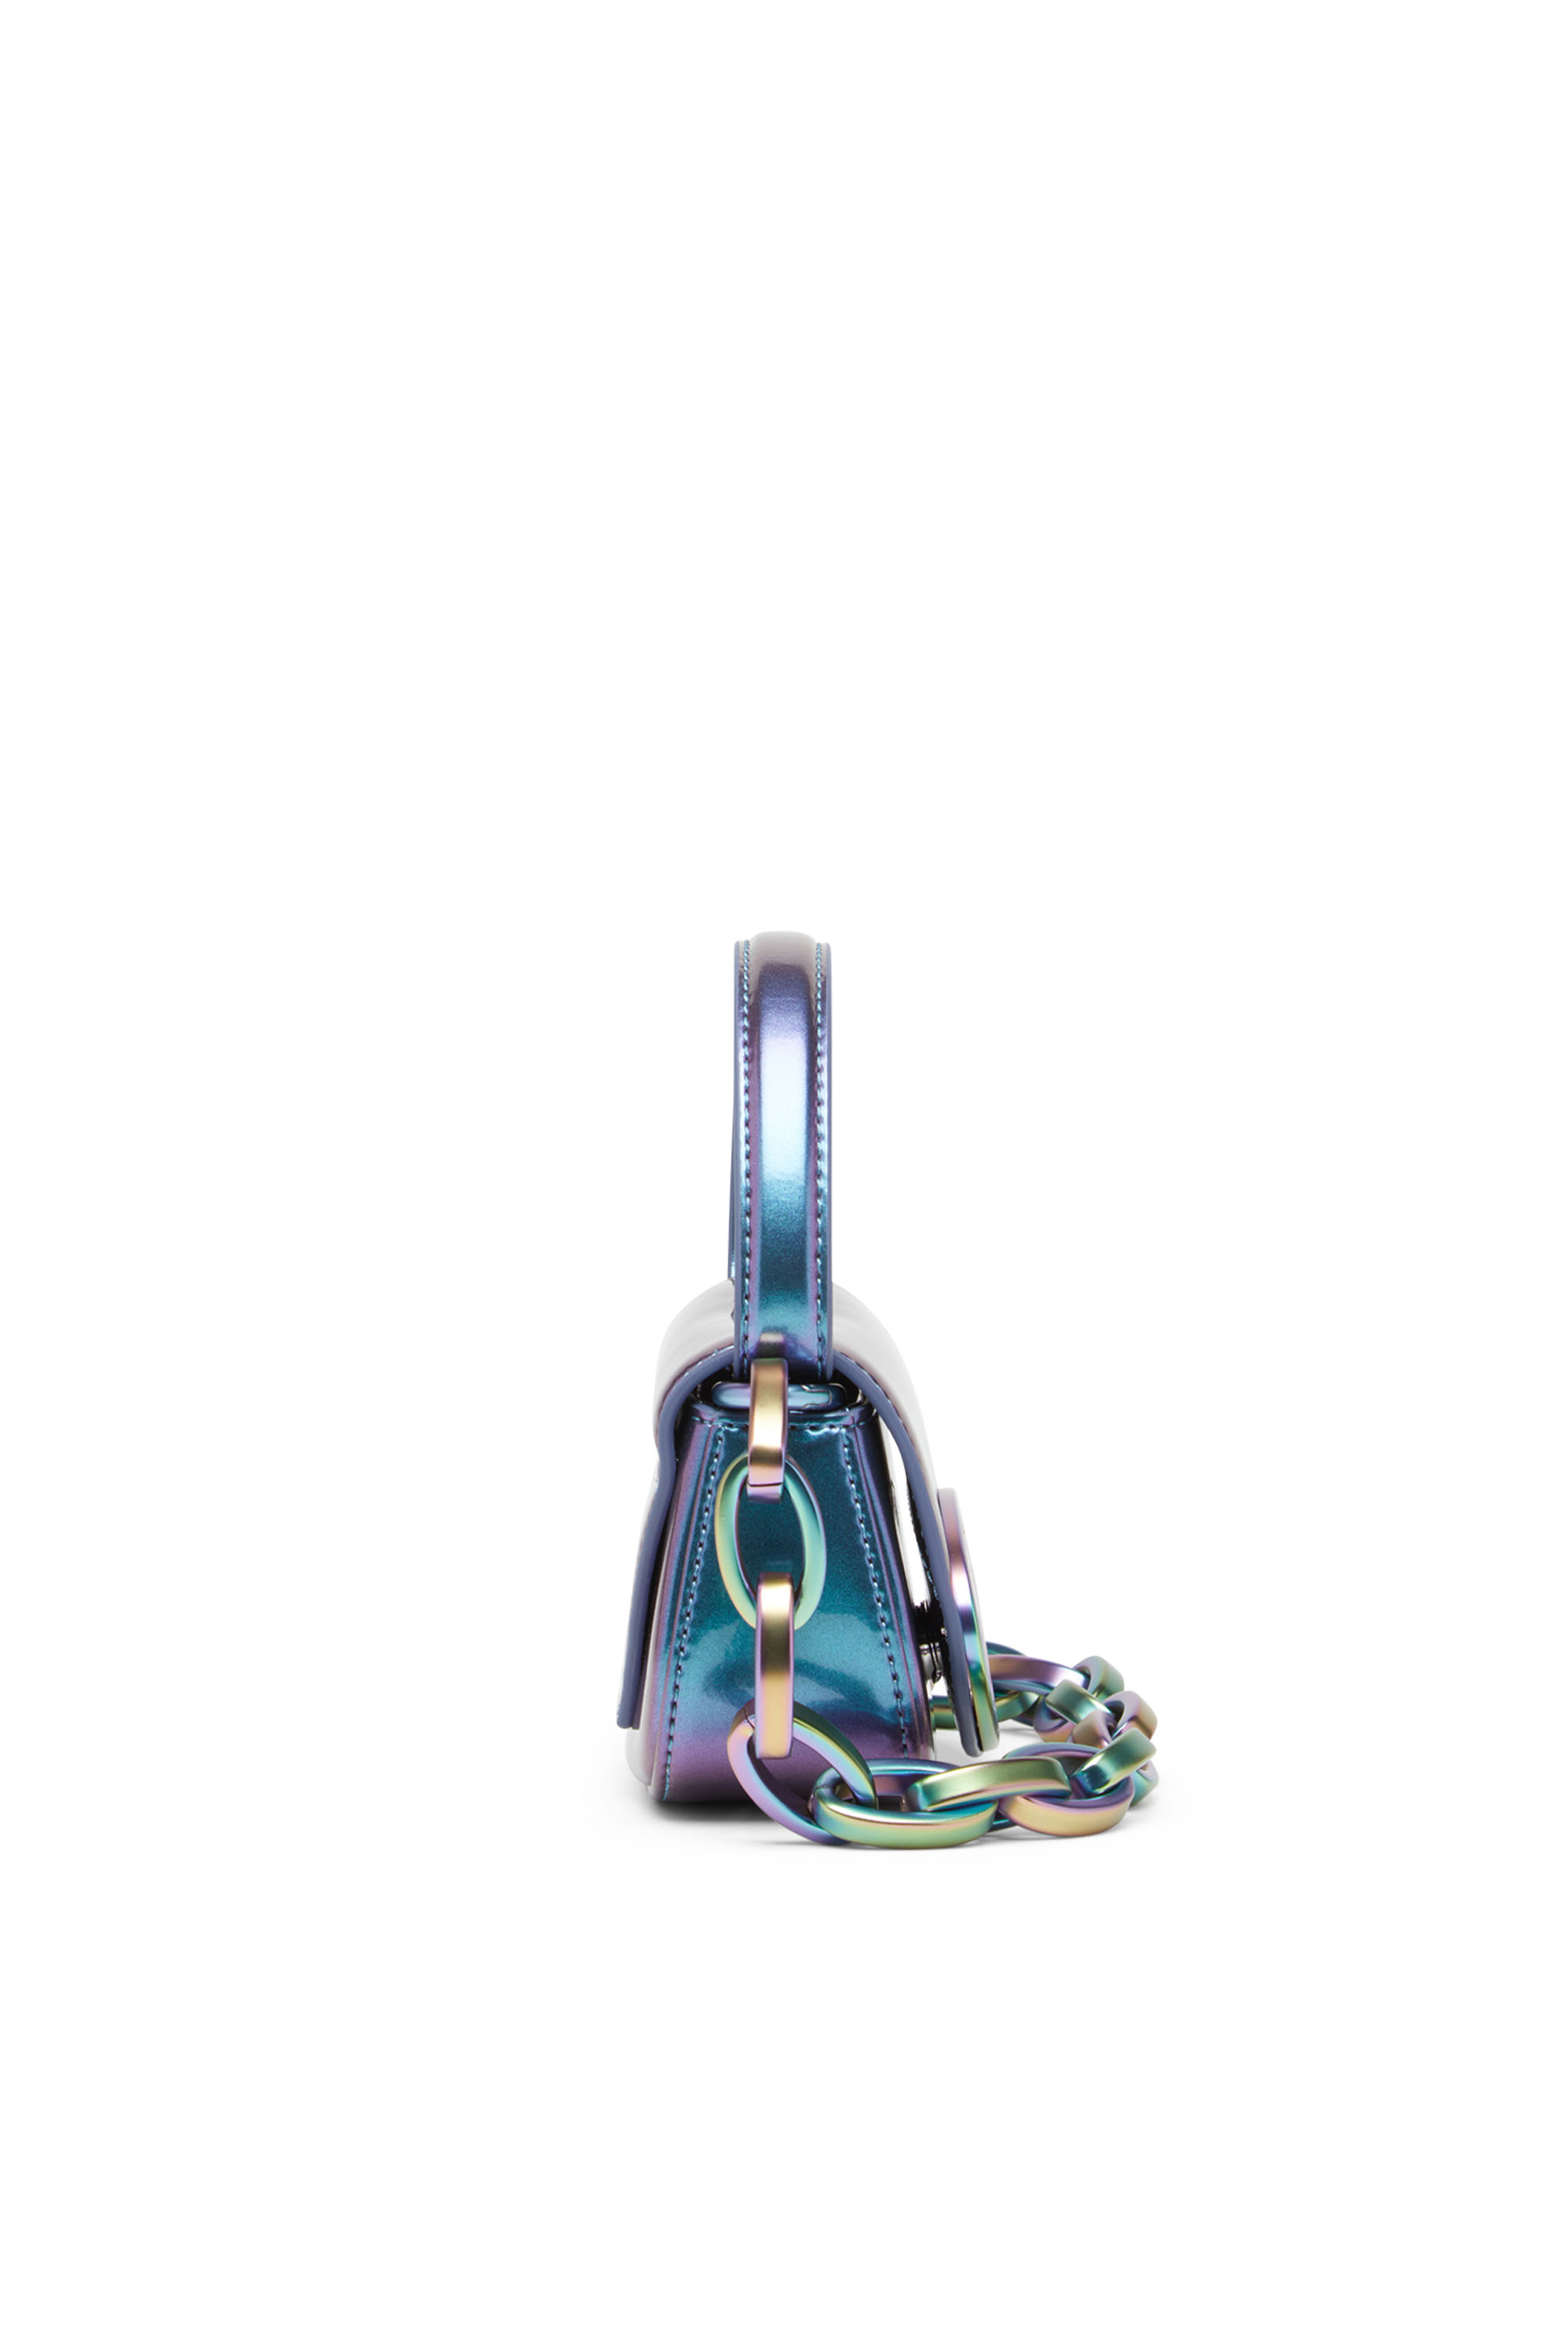 Diesel - 1DR XS, Woman 1DR XS-Iconic iridescent mini bag in Blue - Image 3